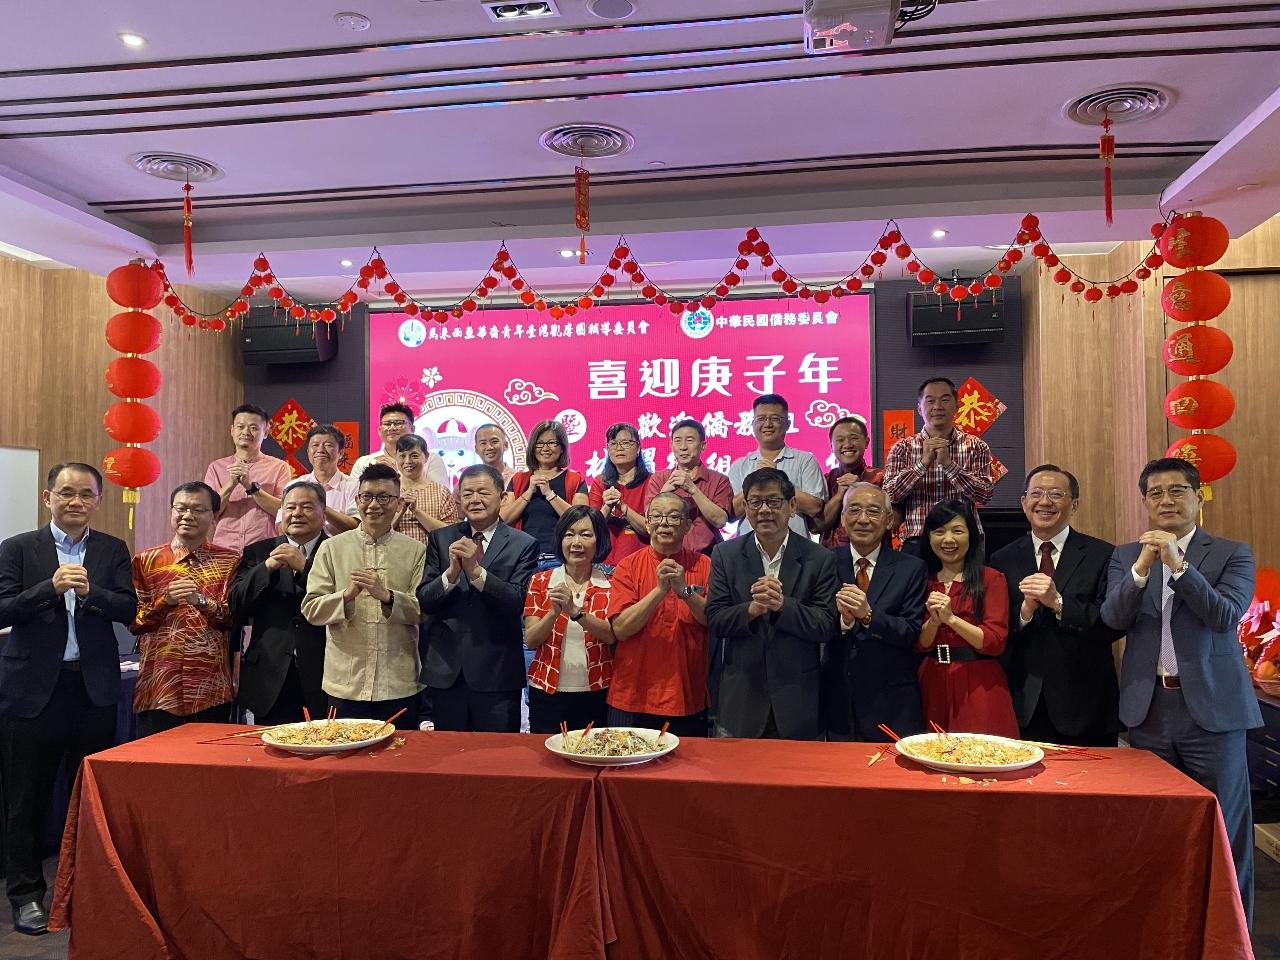  Representative Anne Hung (sixth from left) attends Malaysia Youth Study Tour to Taiwan (Guan Moo Tuan)  Luncheon for celebrating the Chinese New Year.
